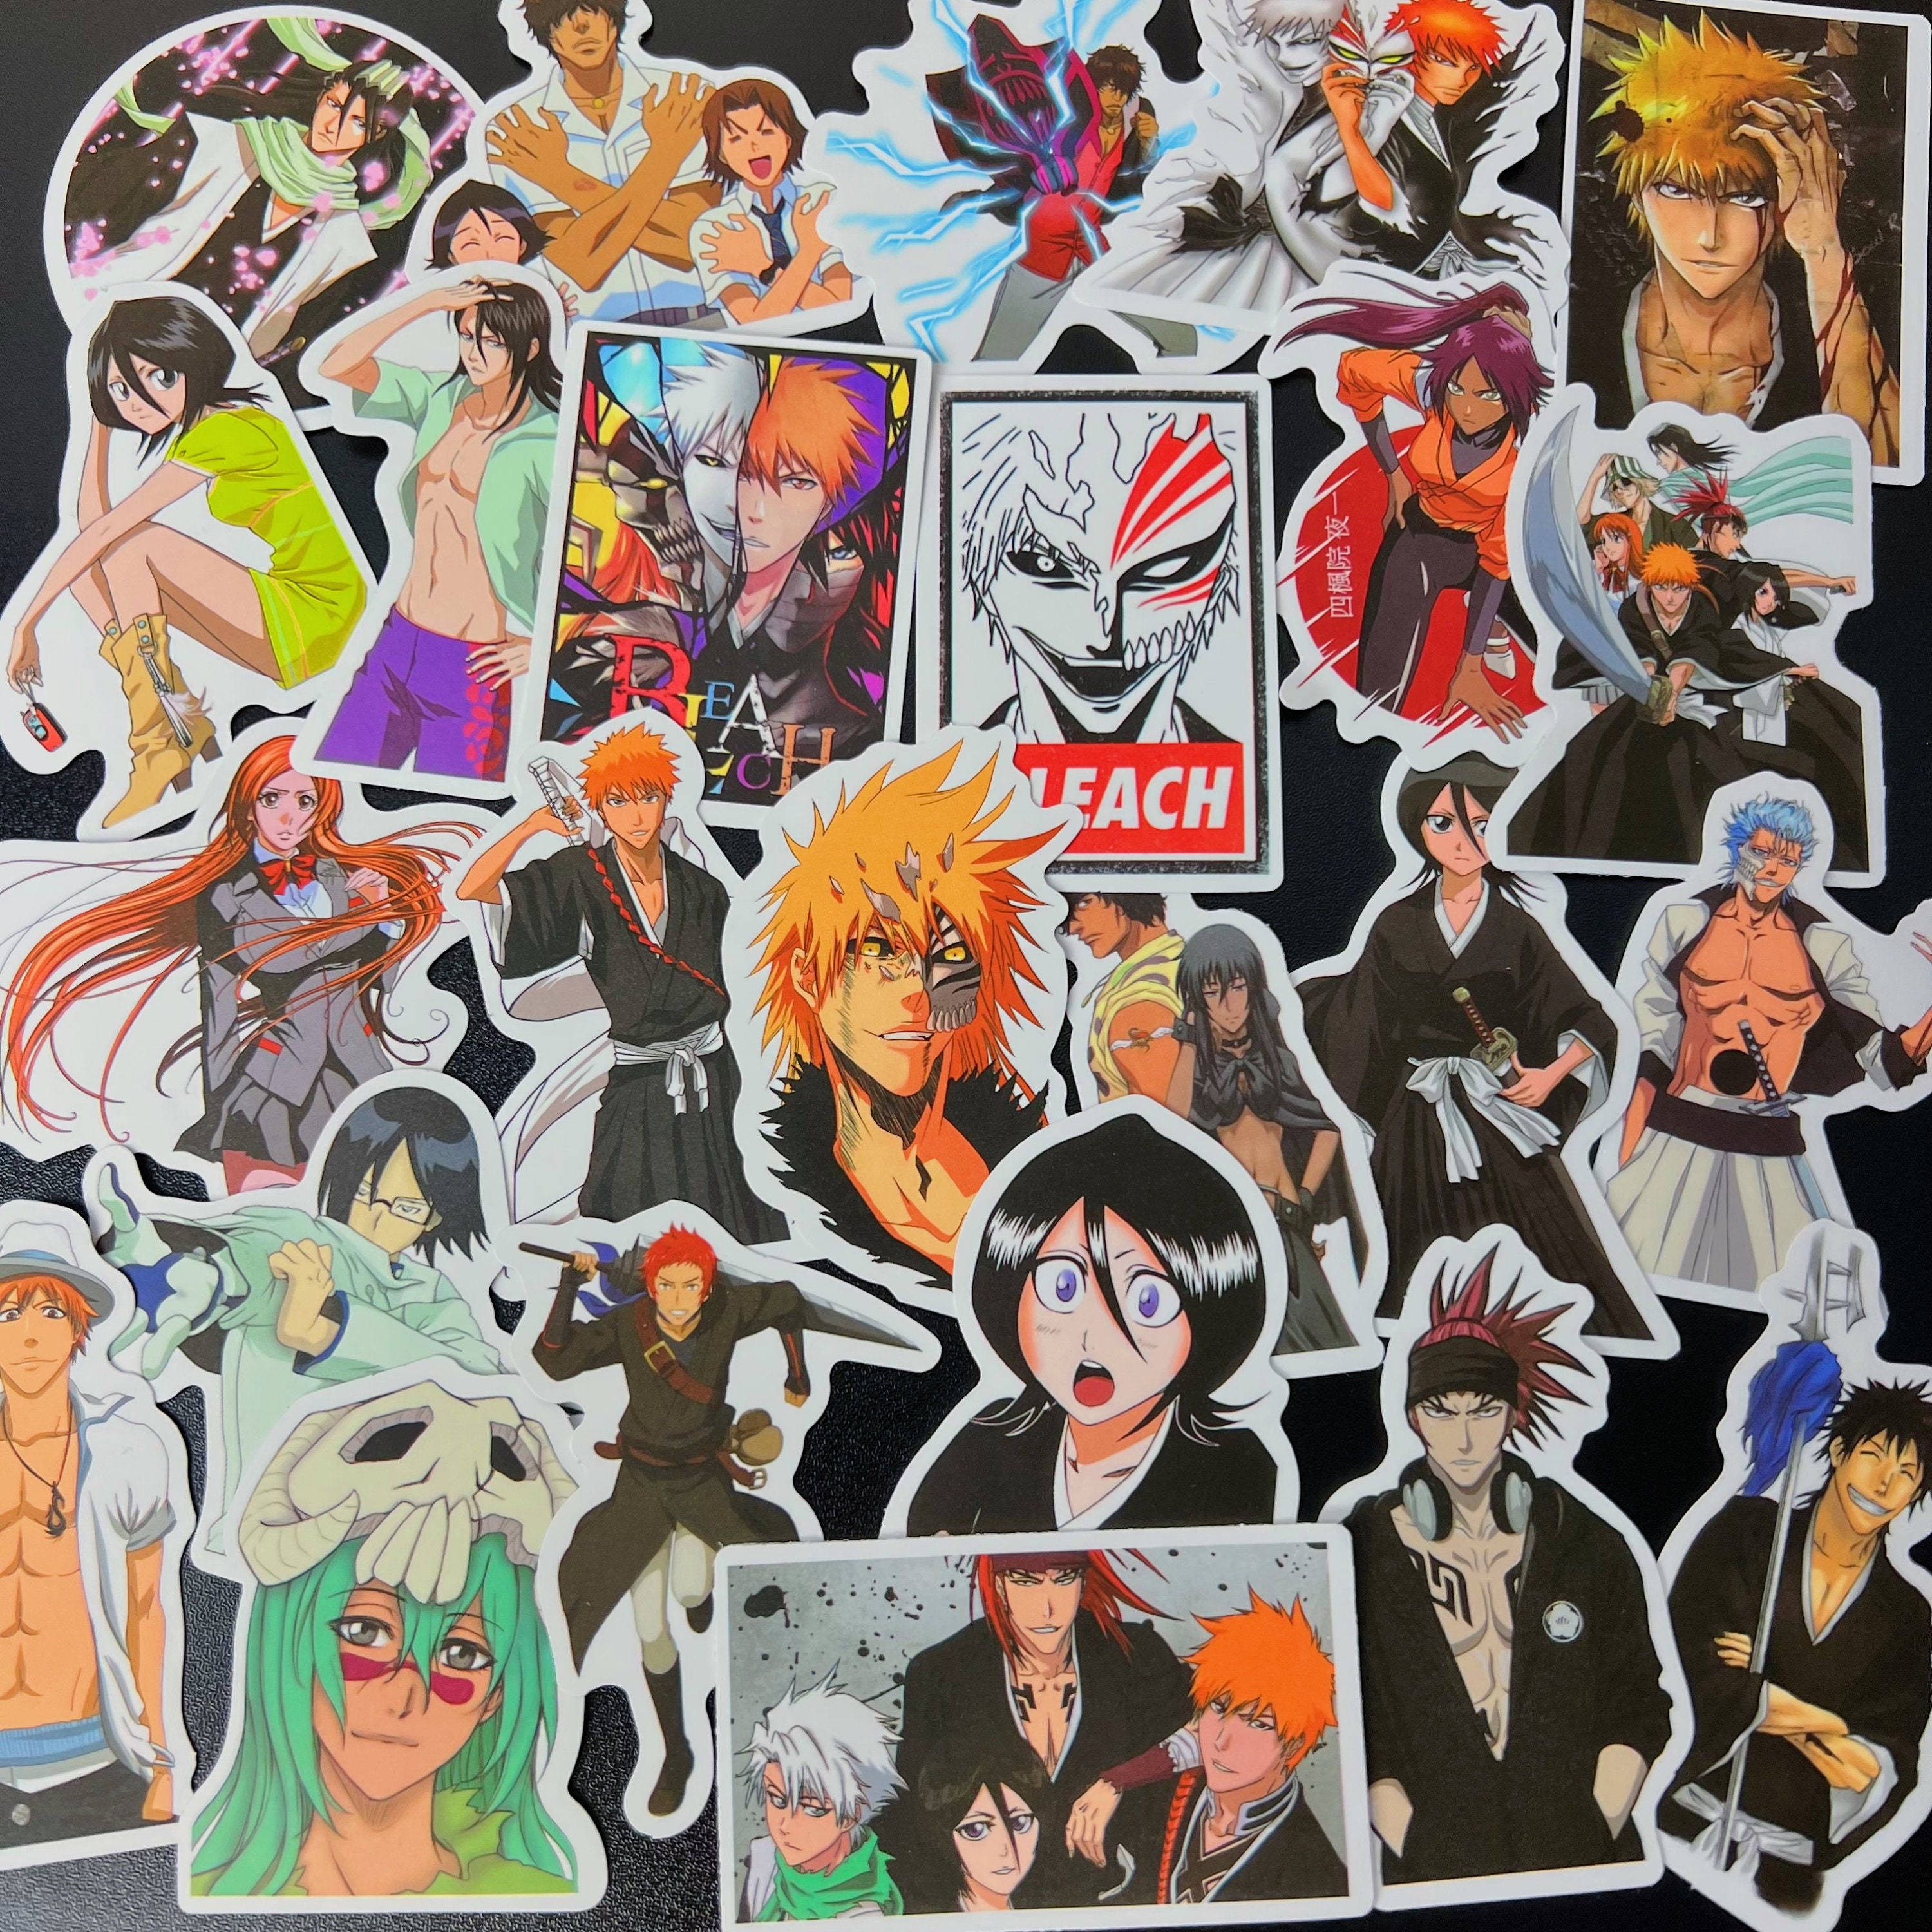 Duftgu One Piece Anime Sticker Pack Of 60 Stickers Aesthetic Anime Stickers  For Stylus Price in India  Buy Duftgu One Piece Anime Sticker Pack Of 60  Stickers Aesthetic Anime Stickers For